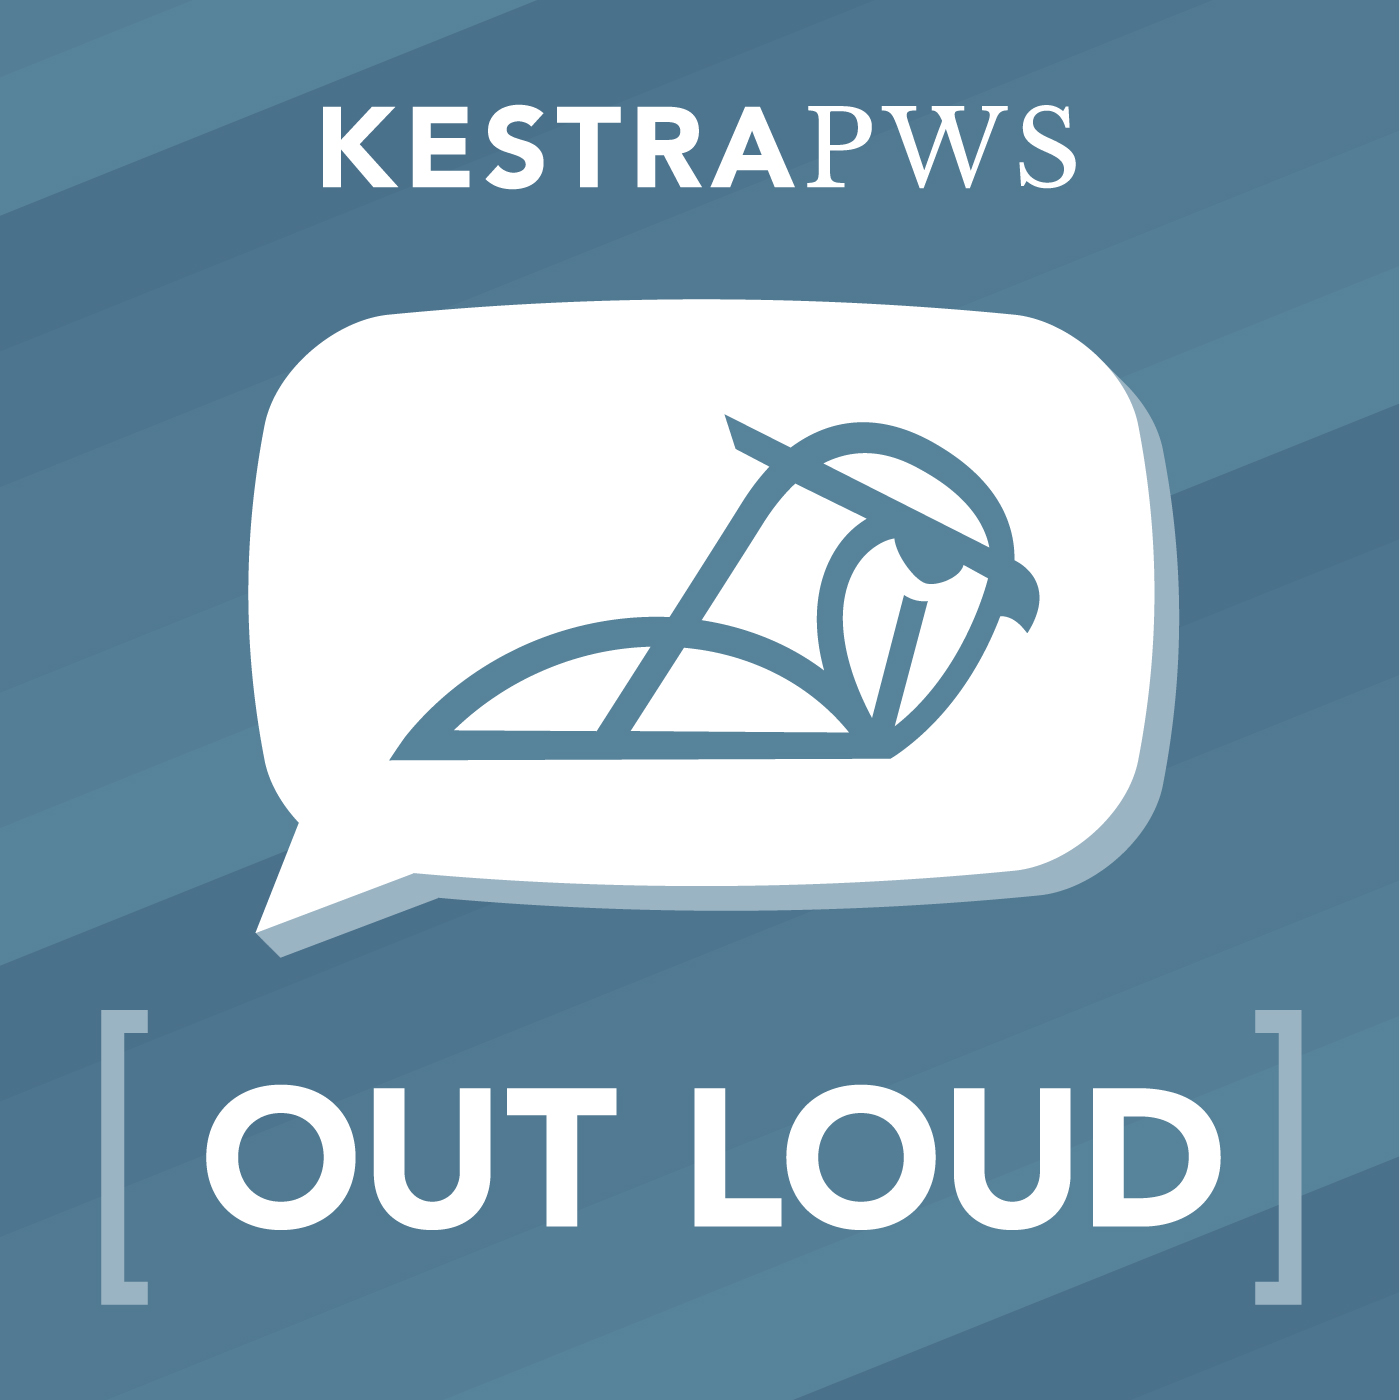 Kestra PWS Out Loud Podcast